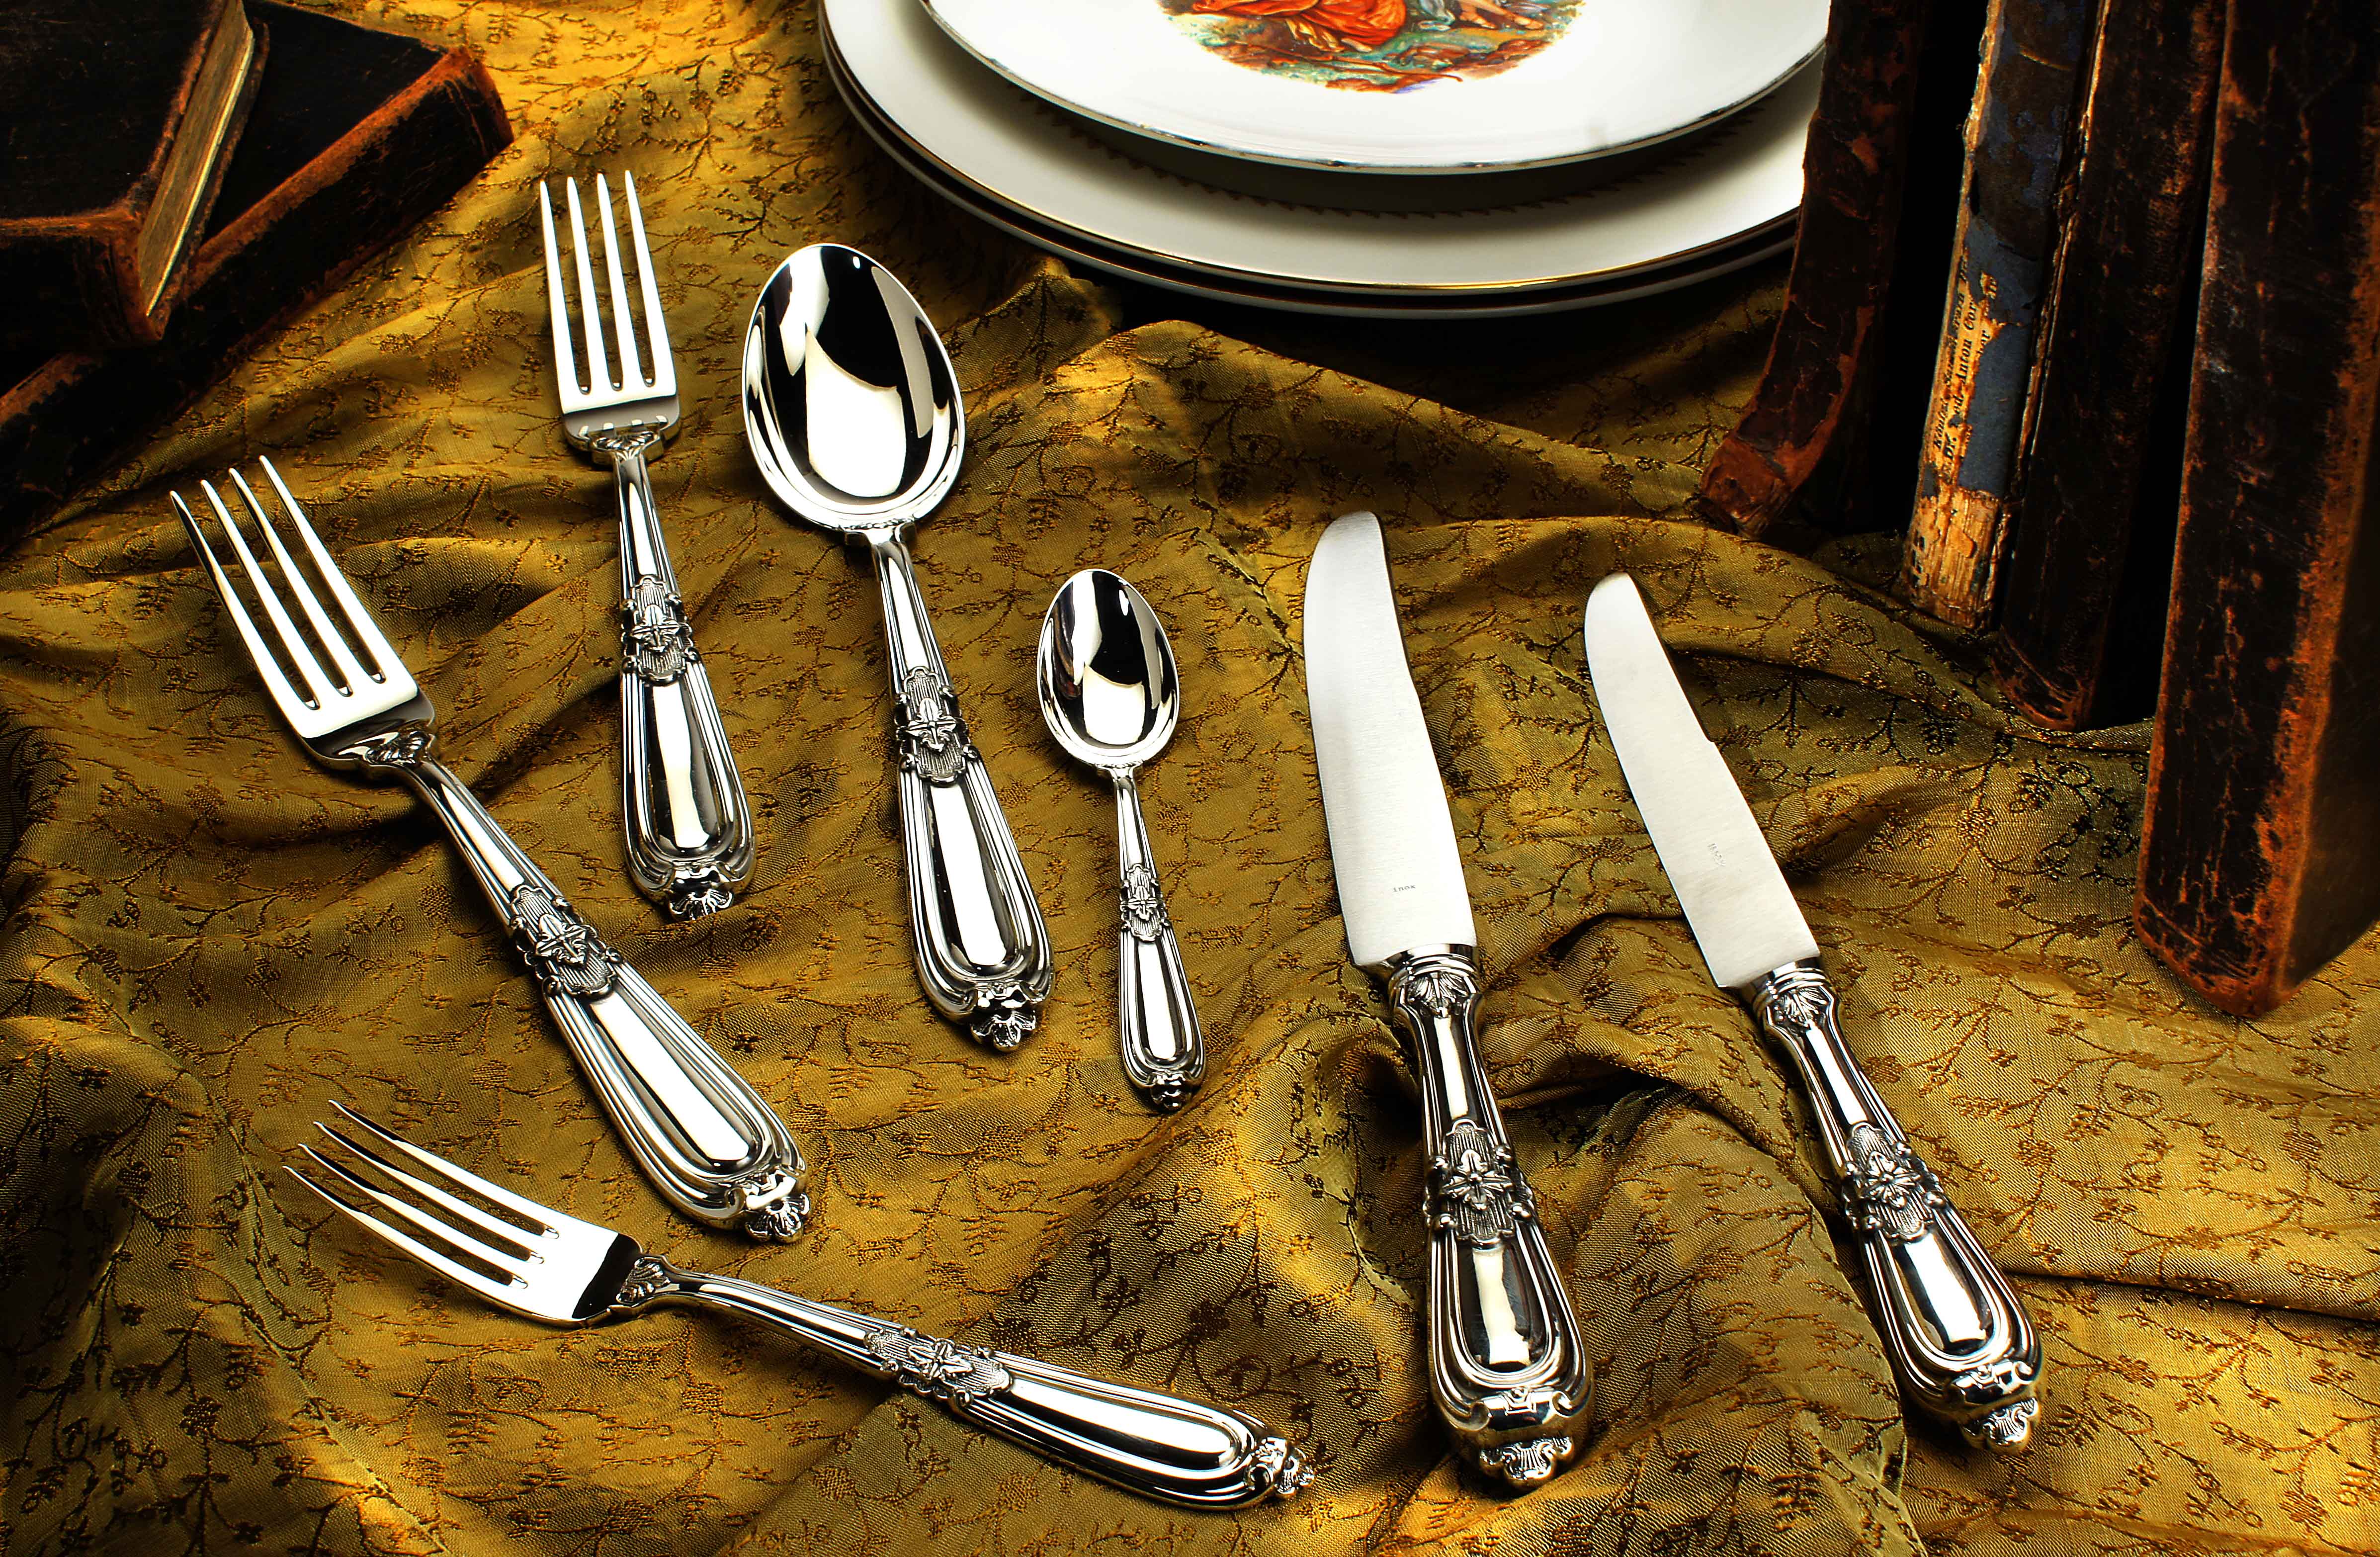 Elegant and Easy to Clean: Silverware in the 21 st Century | Piece Silver Crafting By Zion Hadad